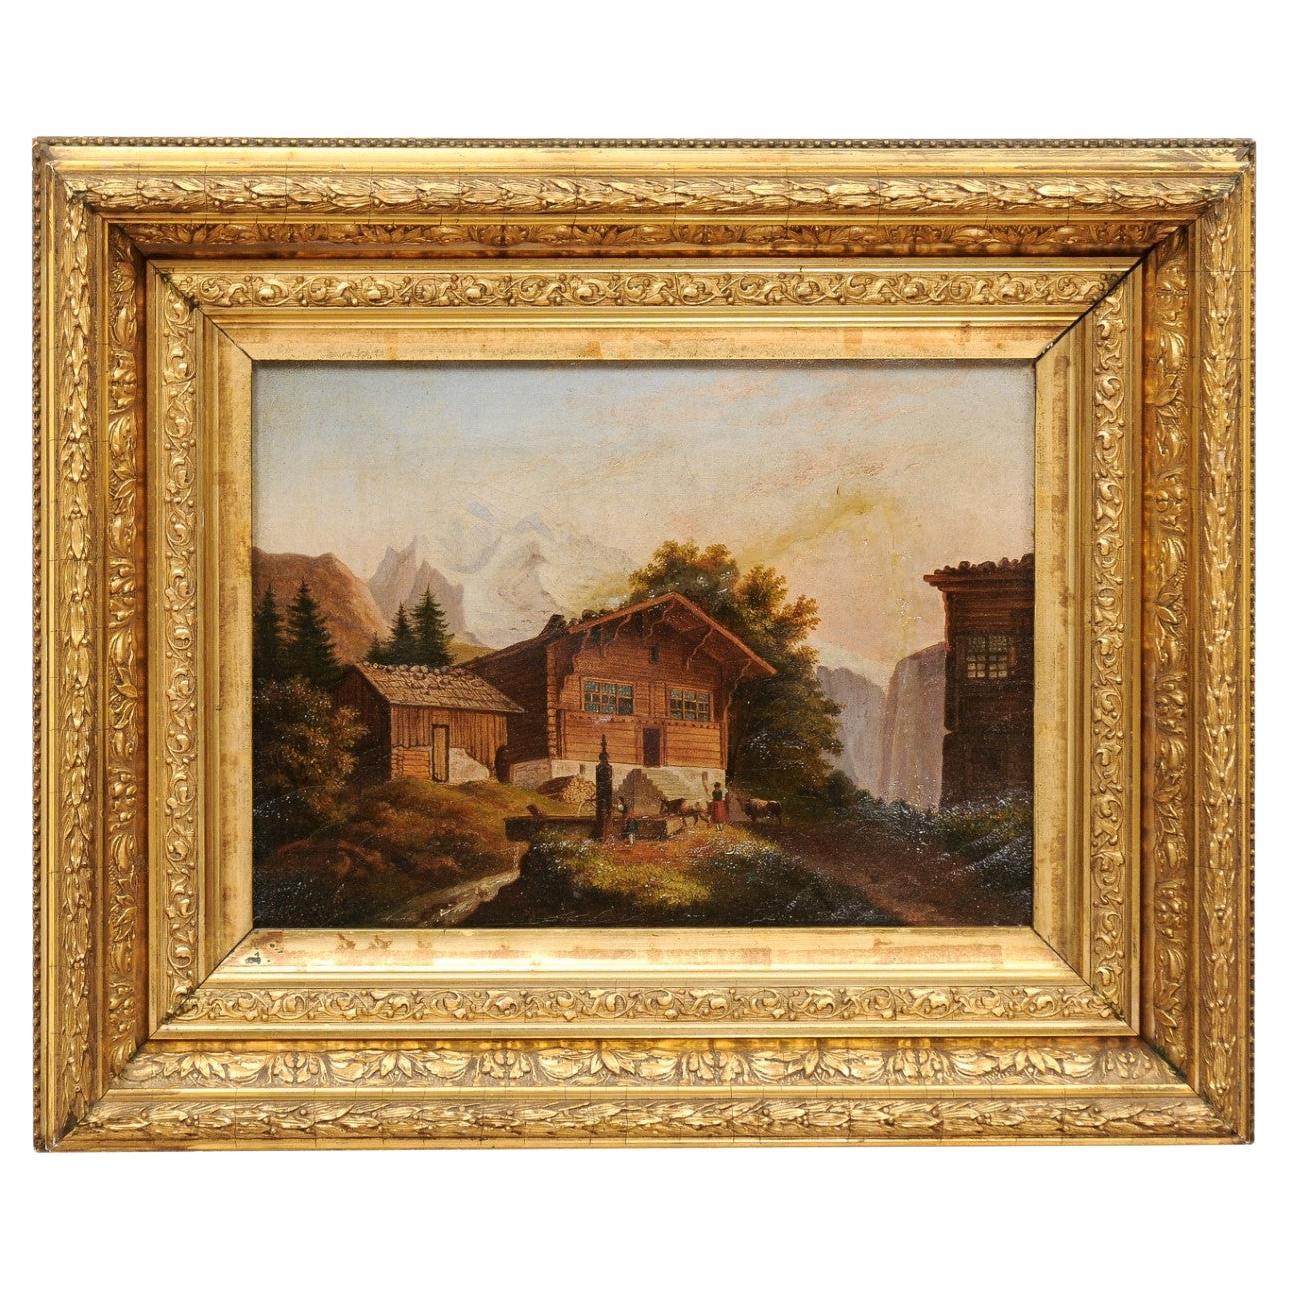  Giltwood Framed Oil on Canvas Painting of Chalet, 19th Century